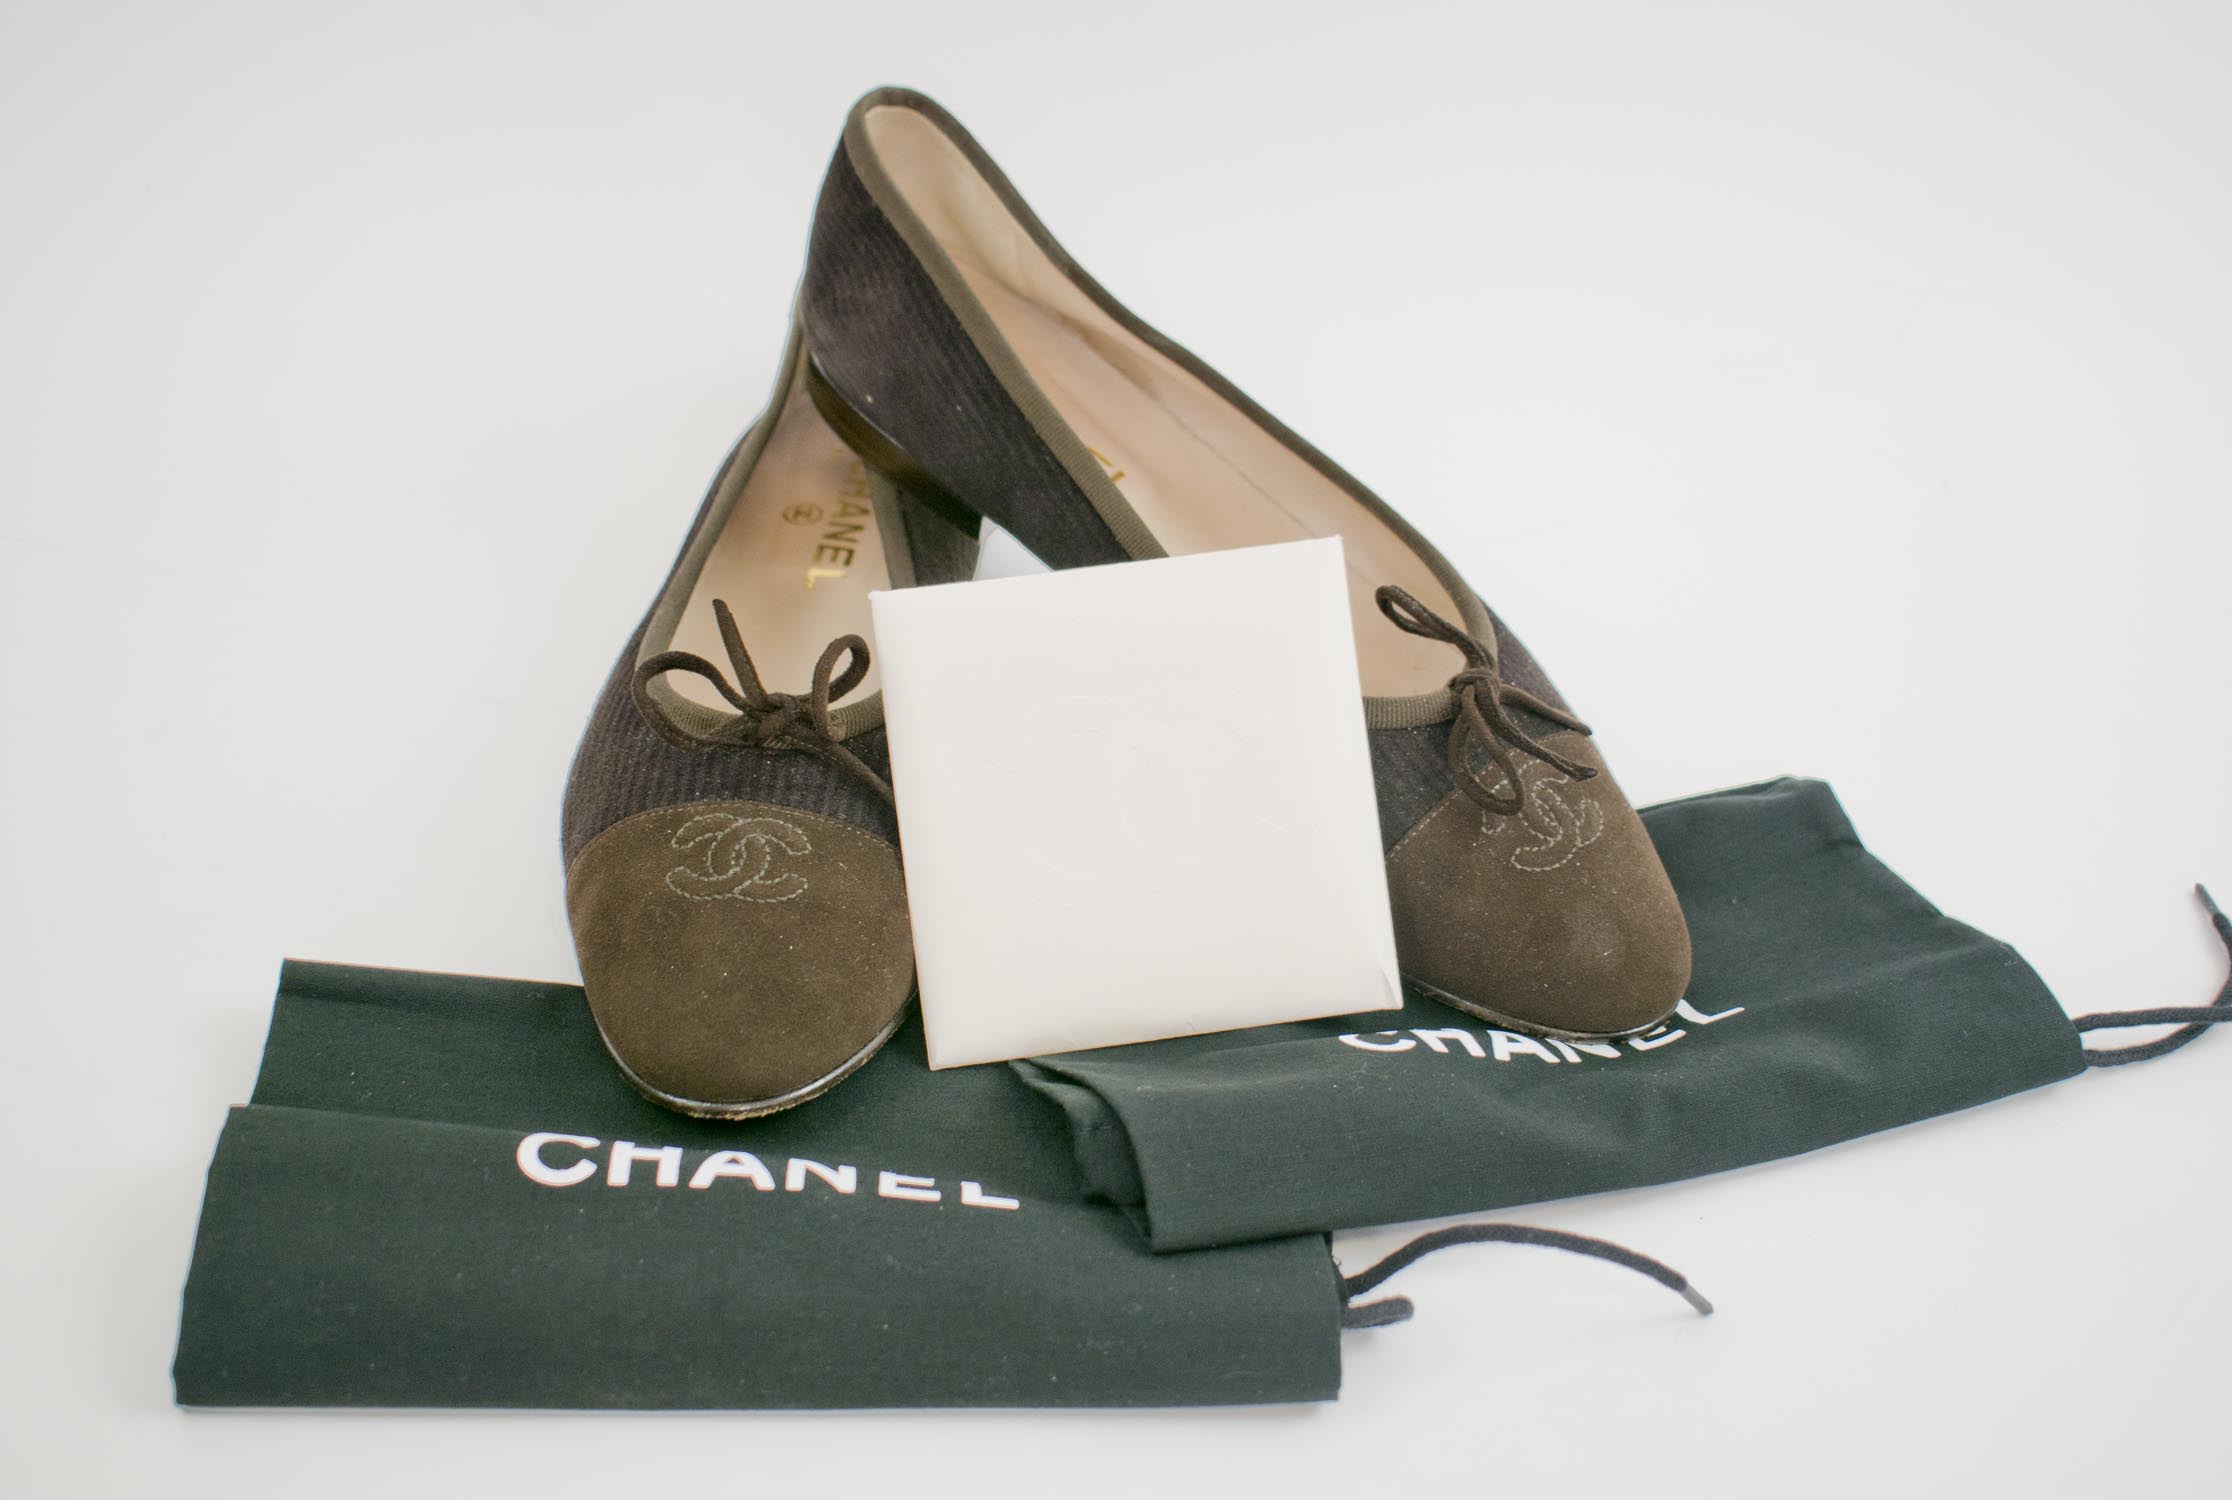 CHANEL BALLERINA FLATS, brown suede with intertwined CC logo at